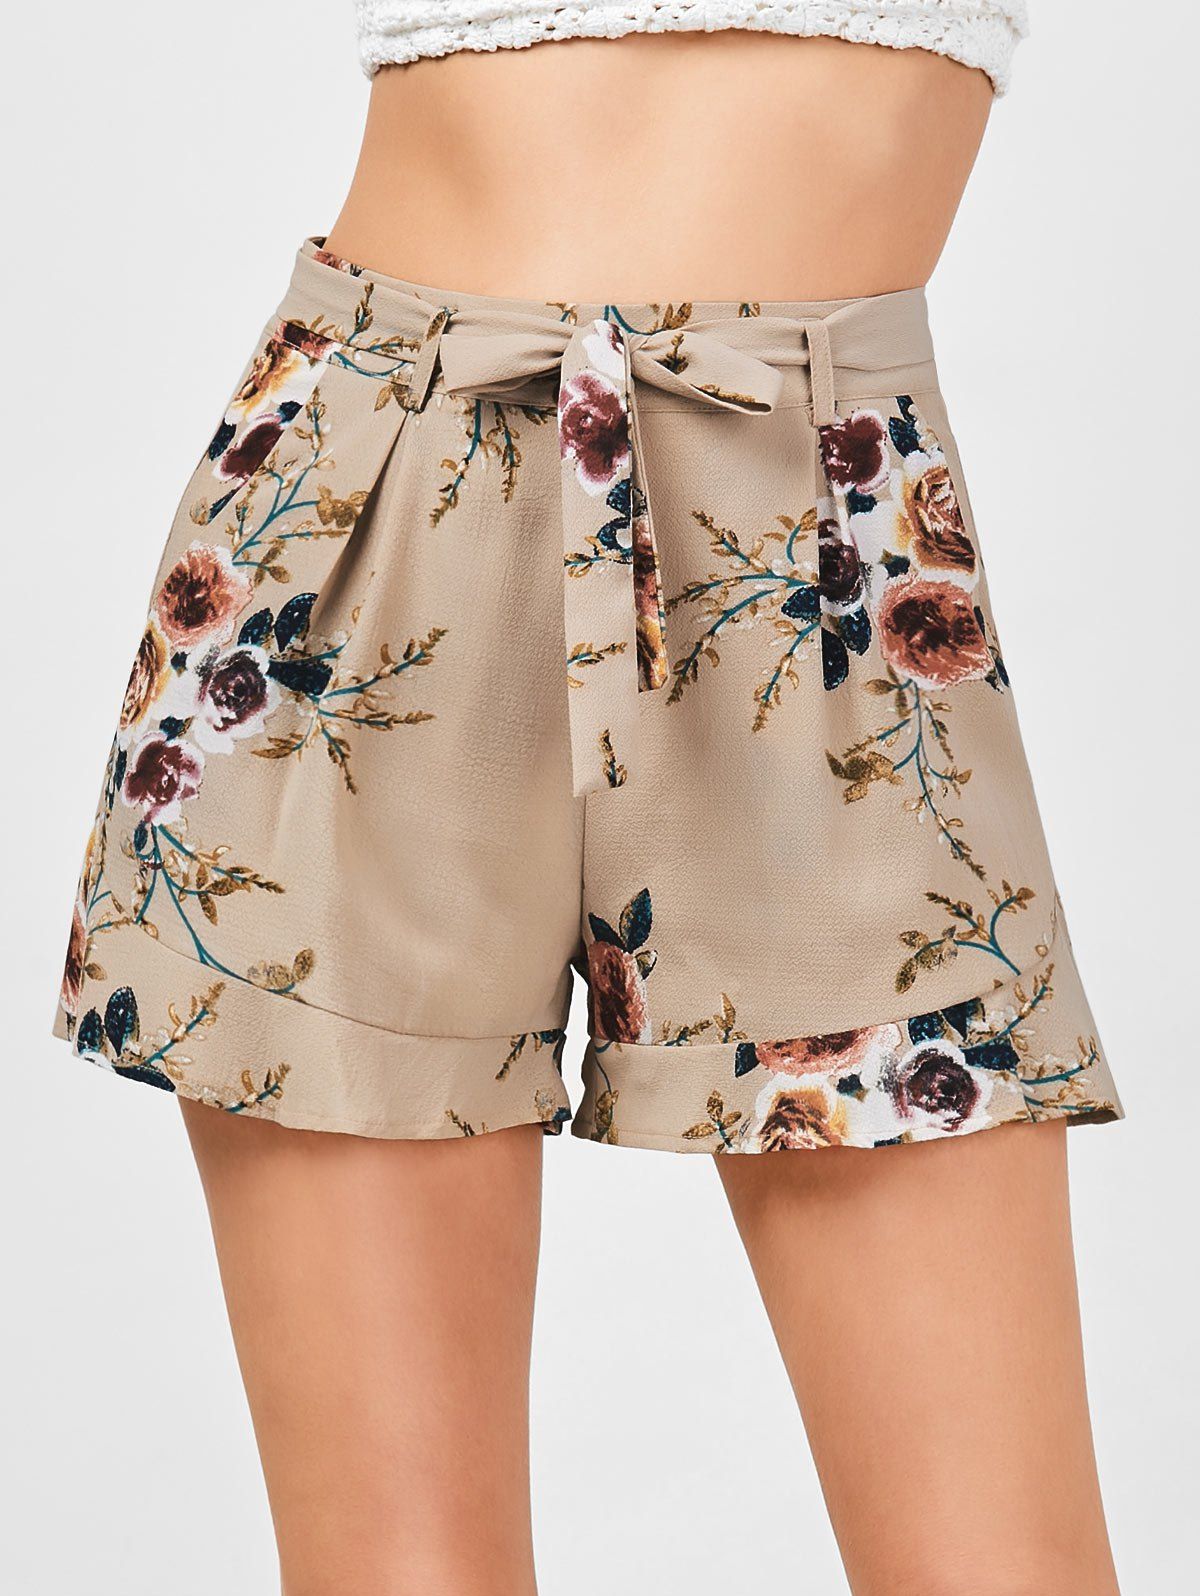 Chic Belted High Waisted Floral Shorts  